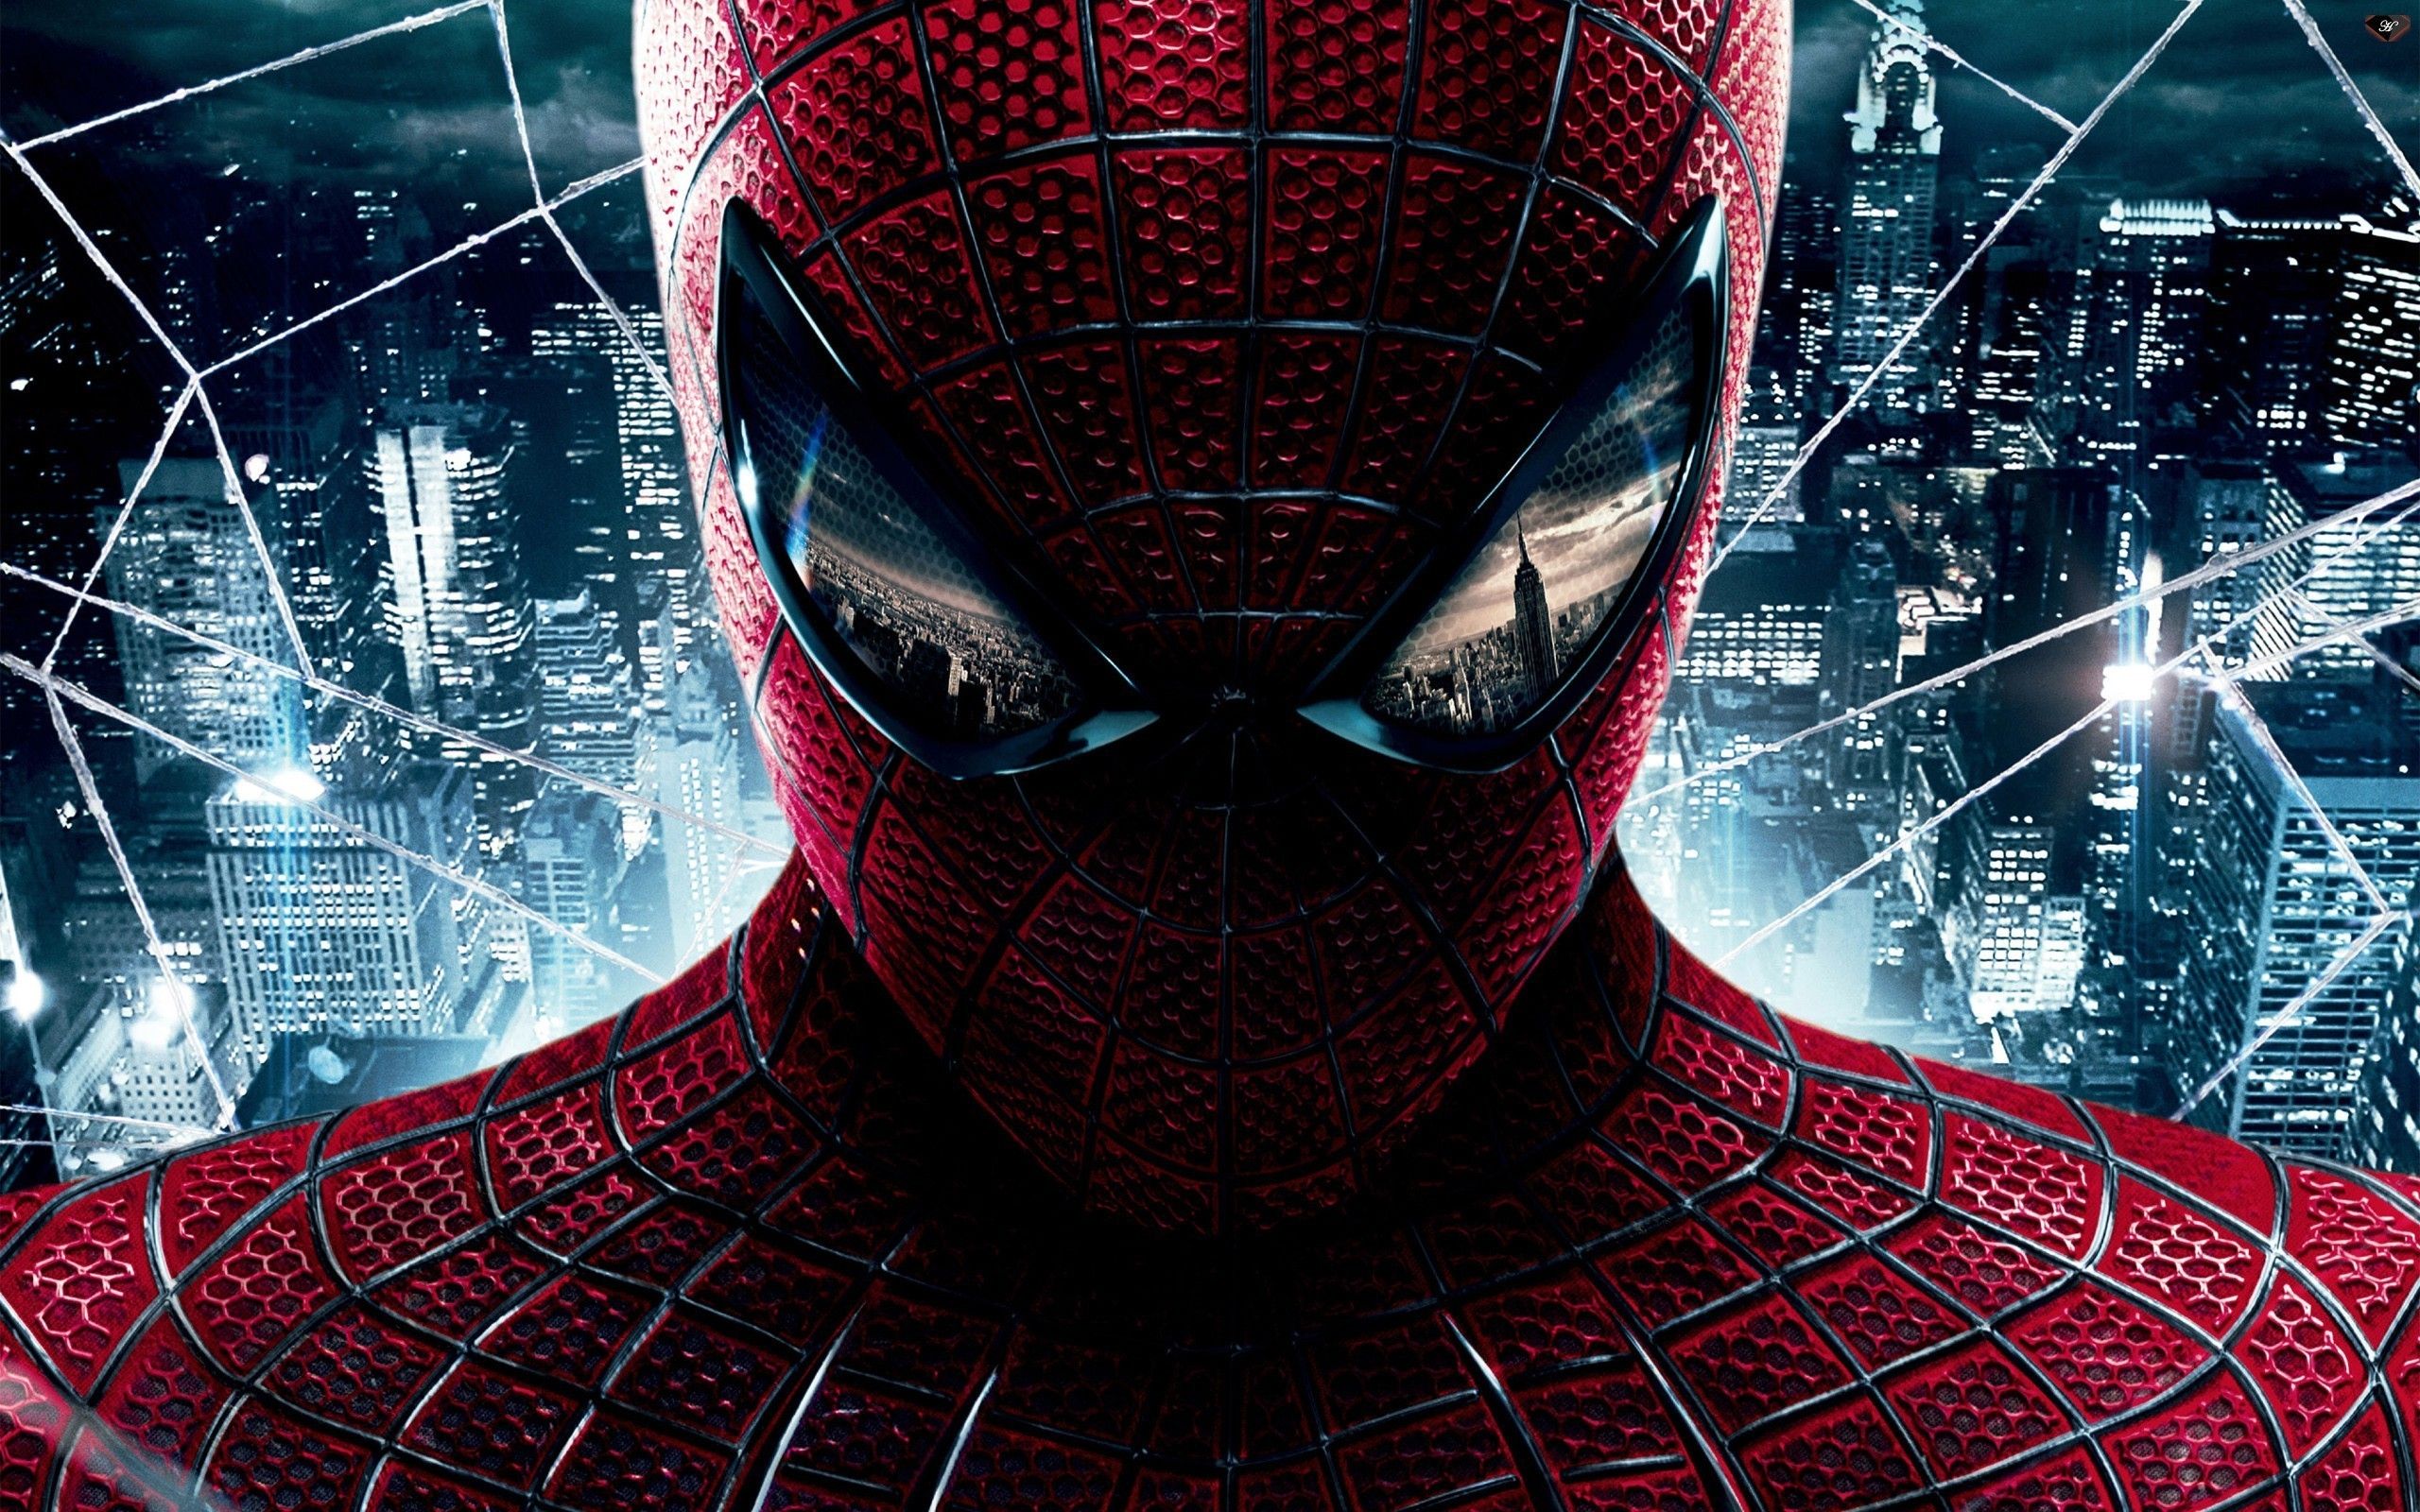 Download Wallpaper Mask Spider Man Web Costume Superhero New The Amazing, 2560x The Amazing Spider Man